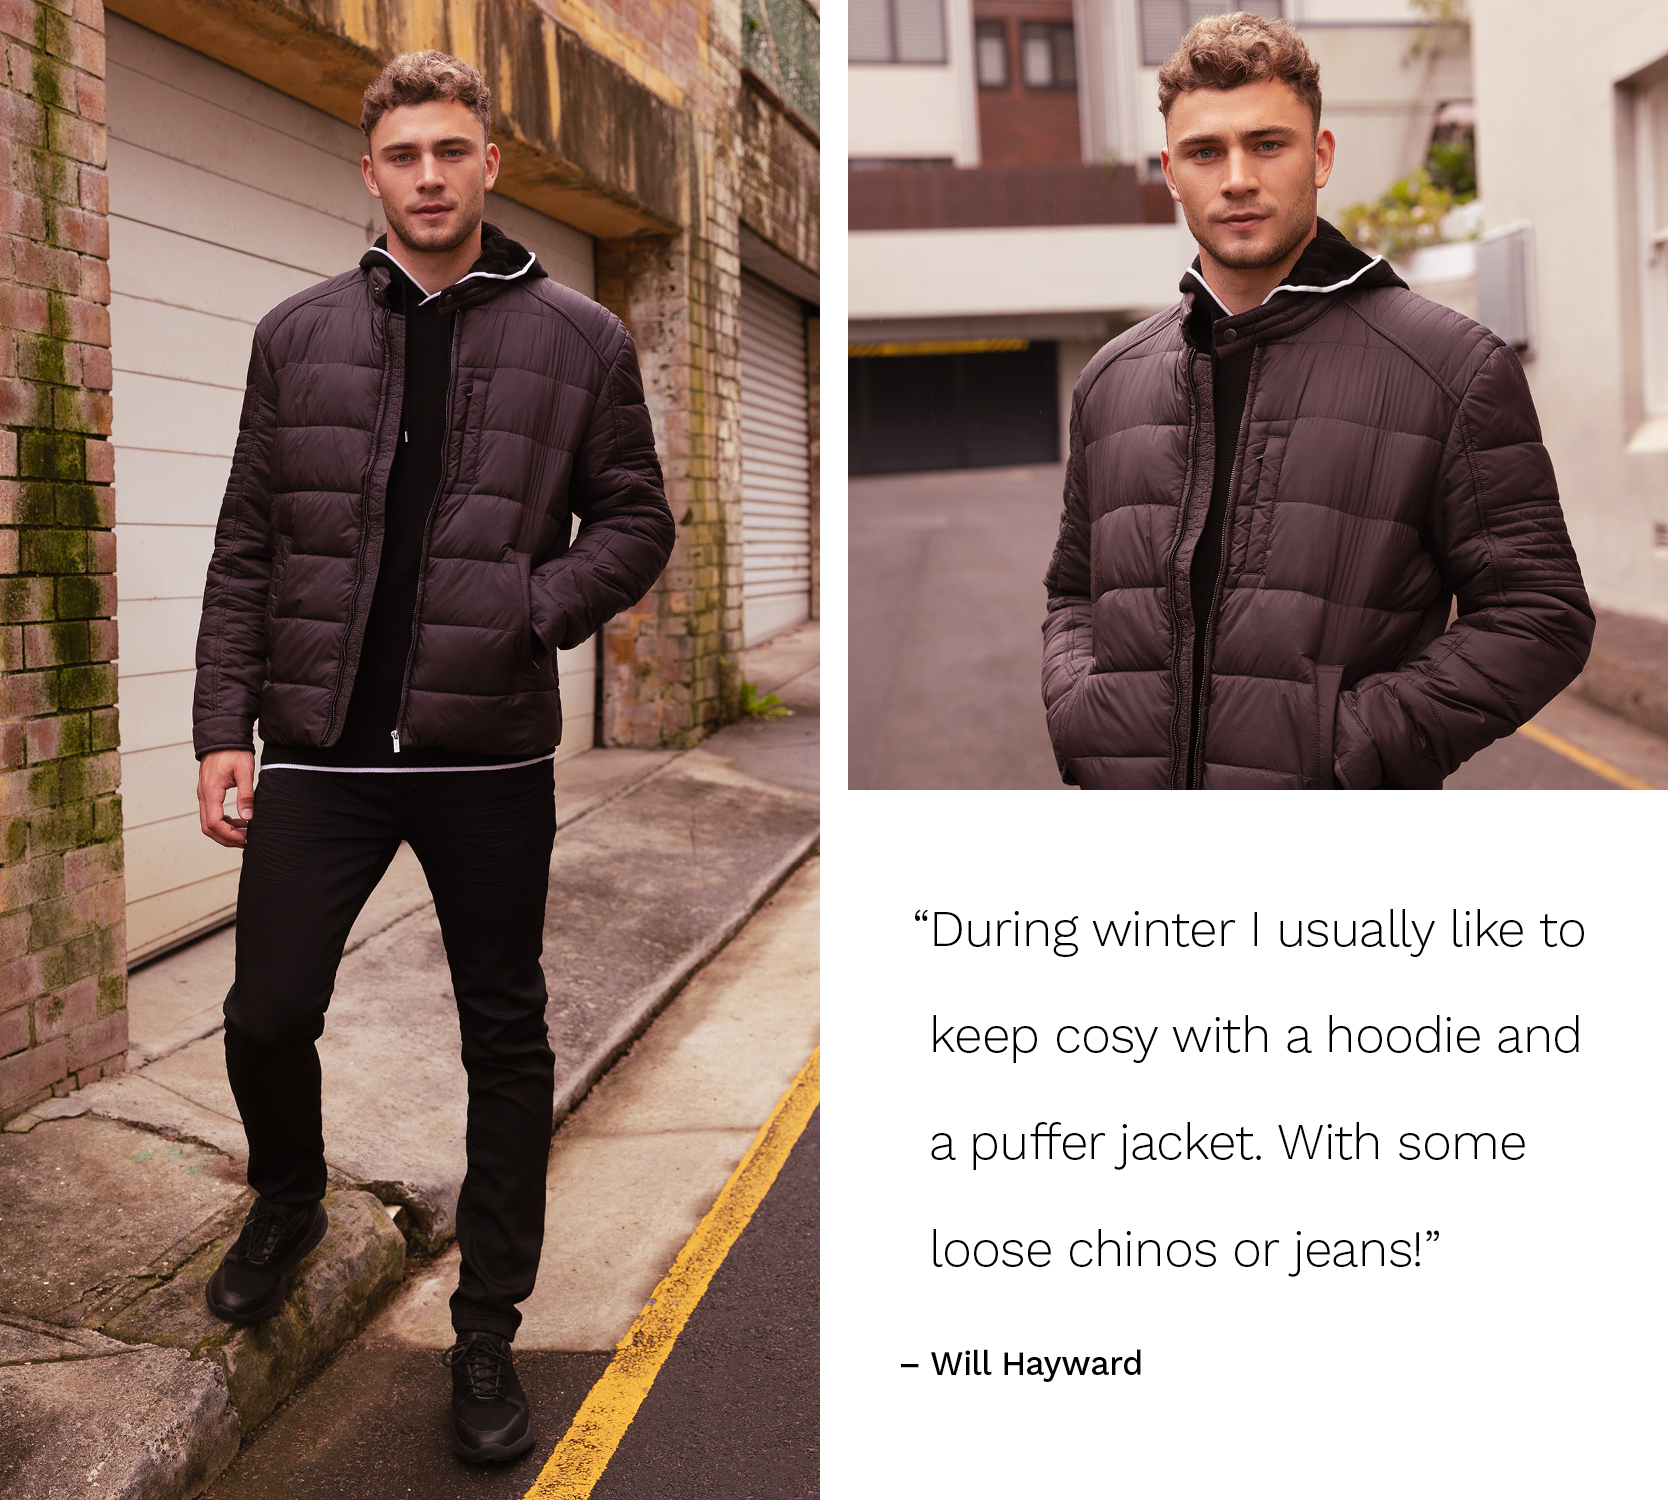 Will Hayward outside wearing black puffer jacket, black knit hoodie, black jeans and boots